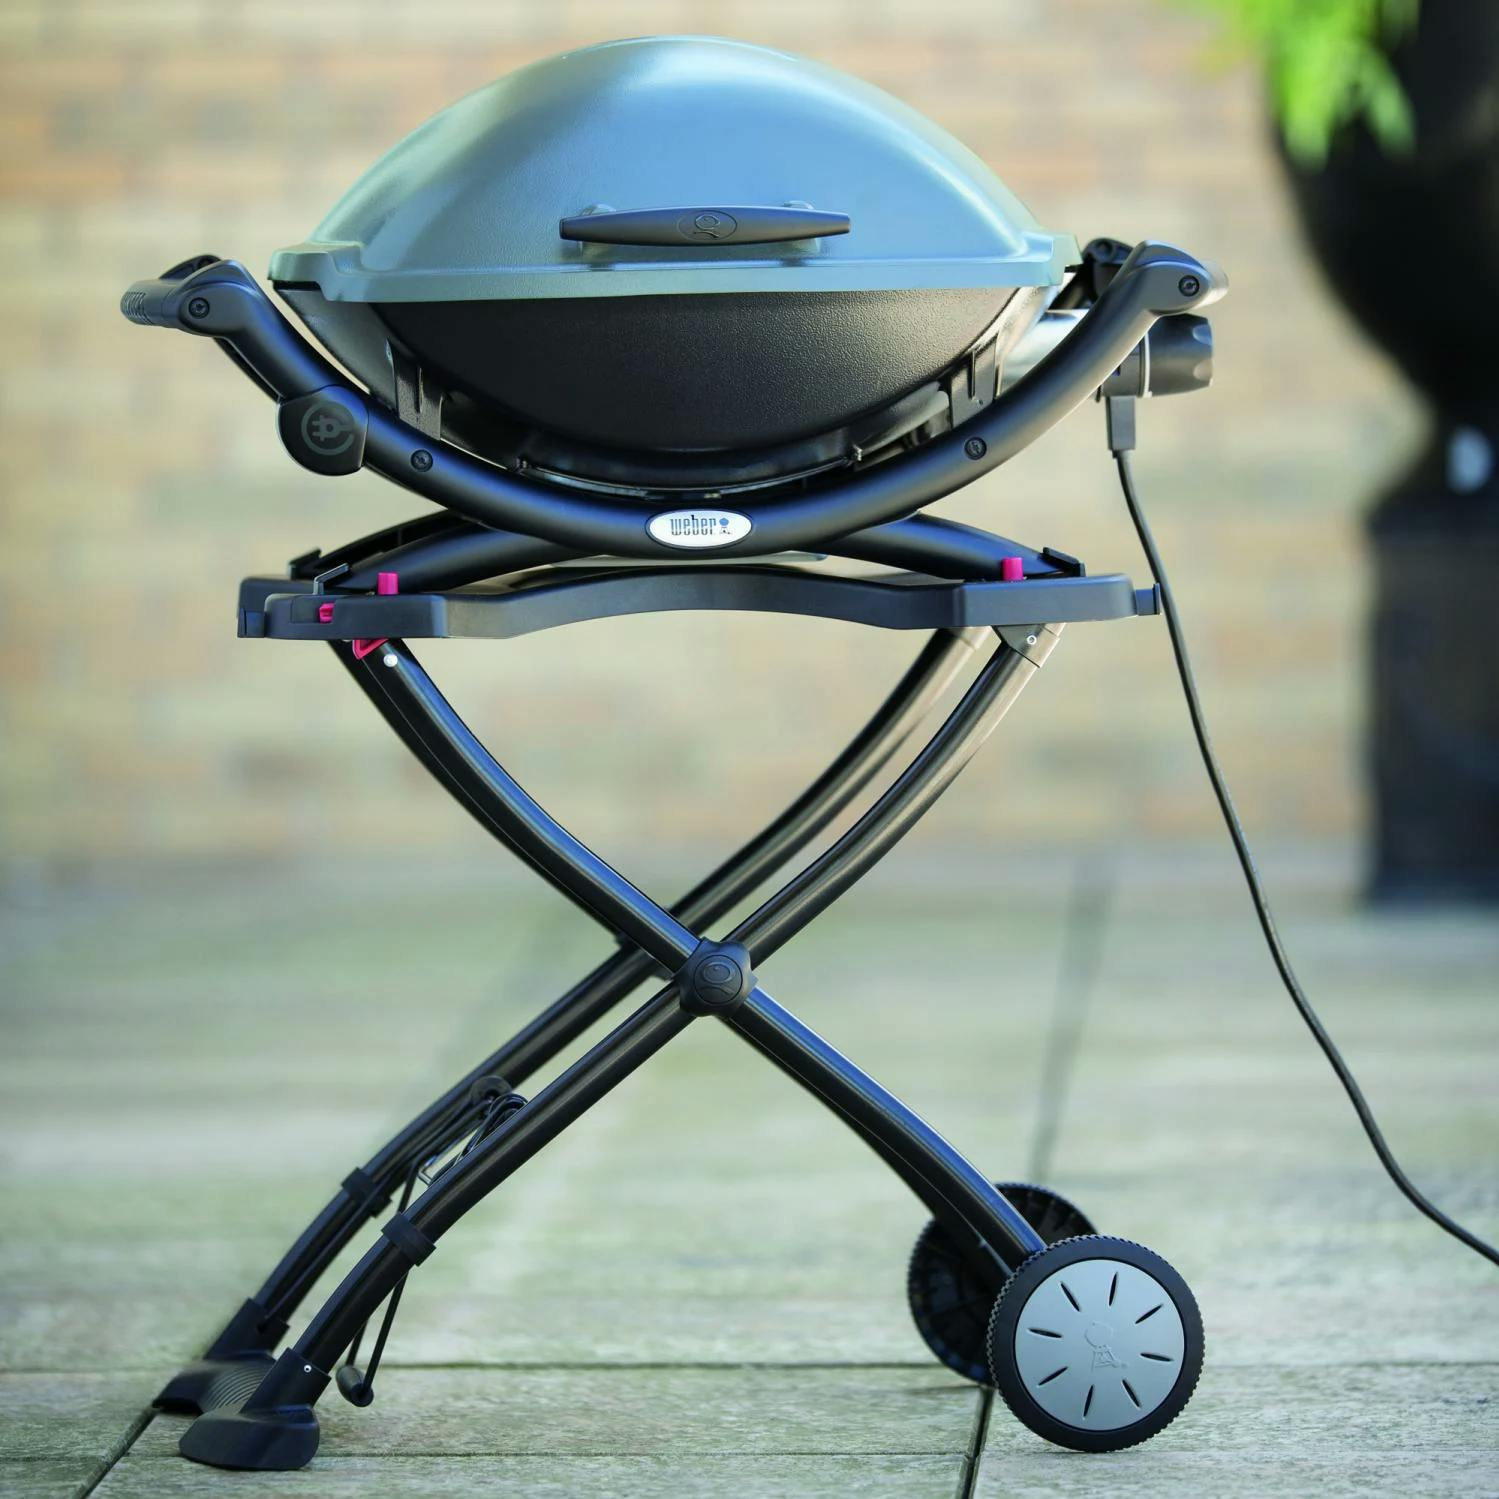 Weber Q 2400 Portable Electric Grill